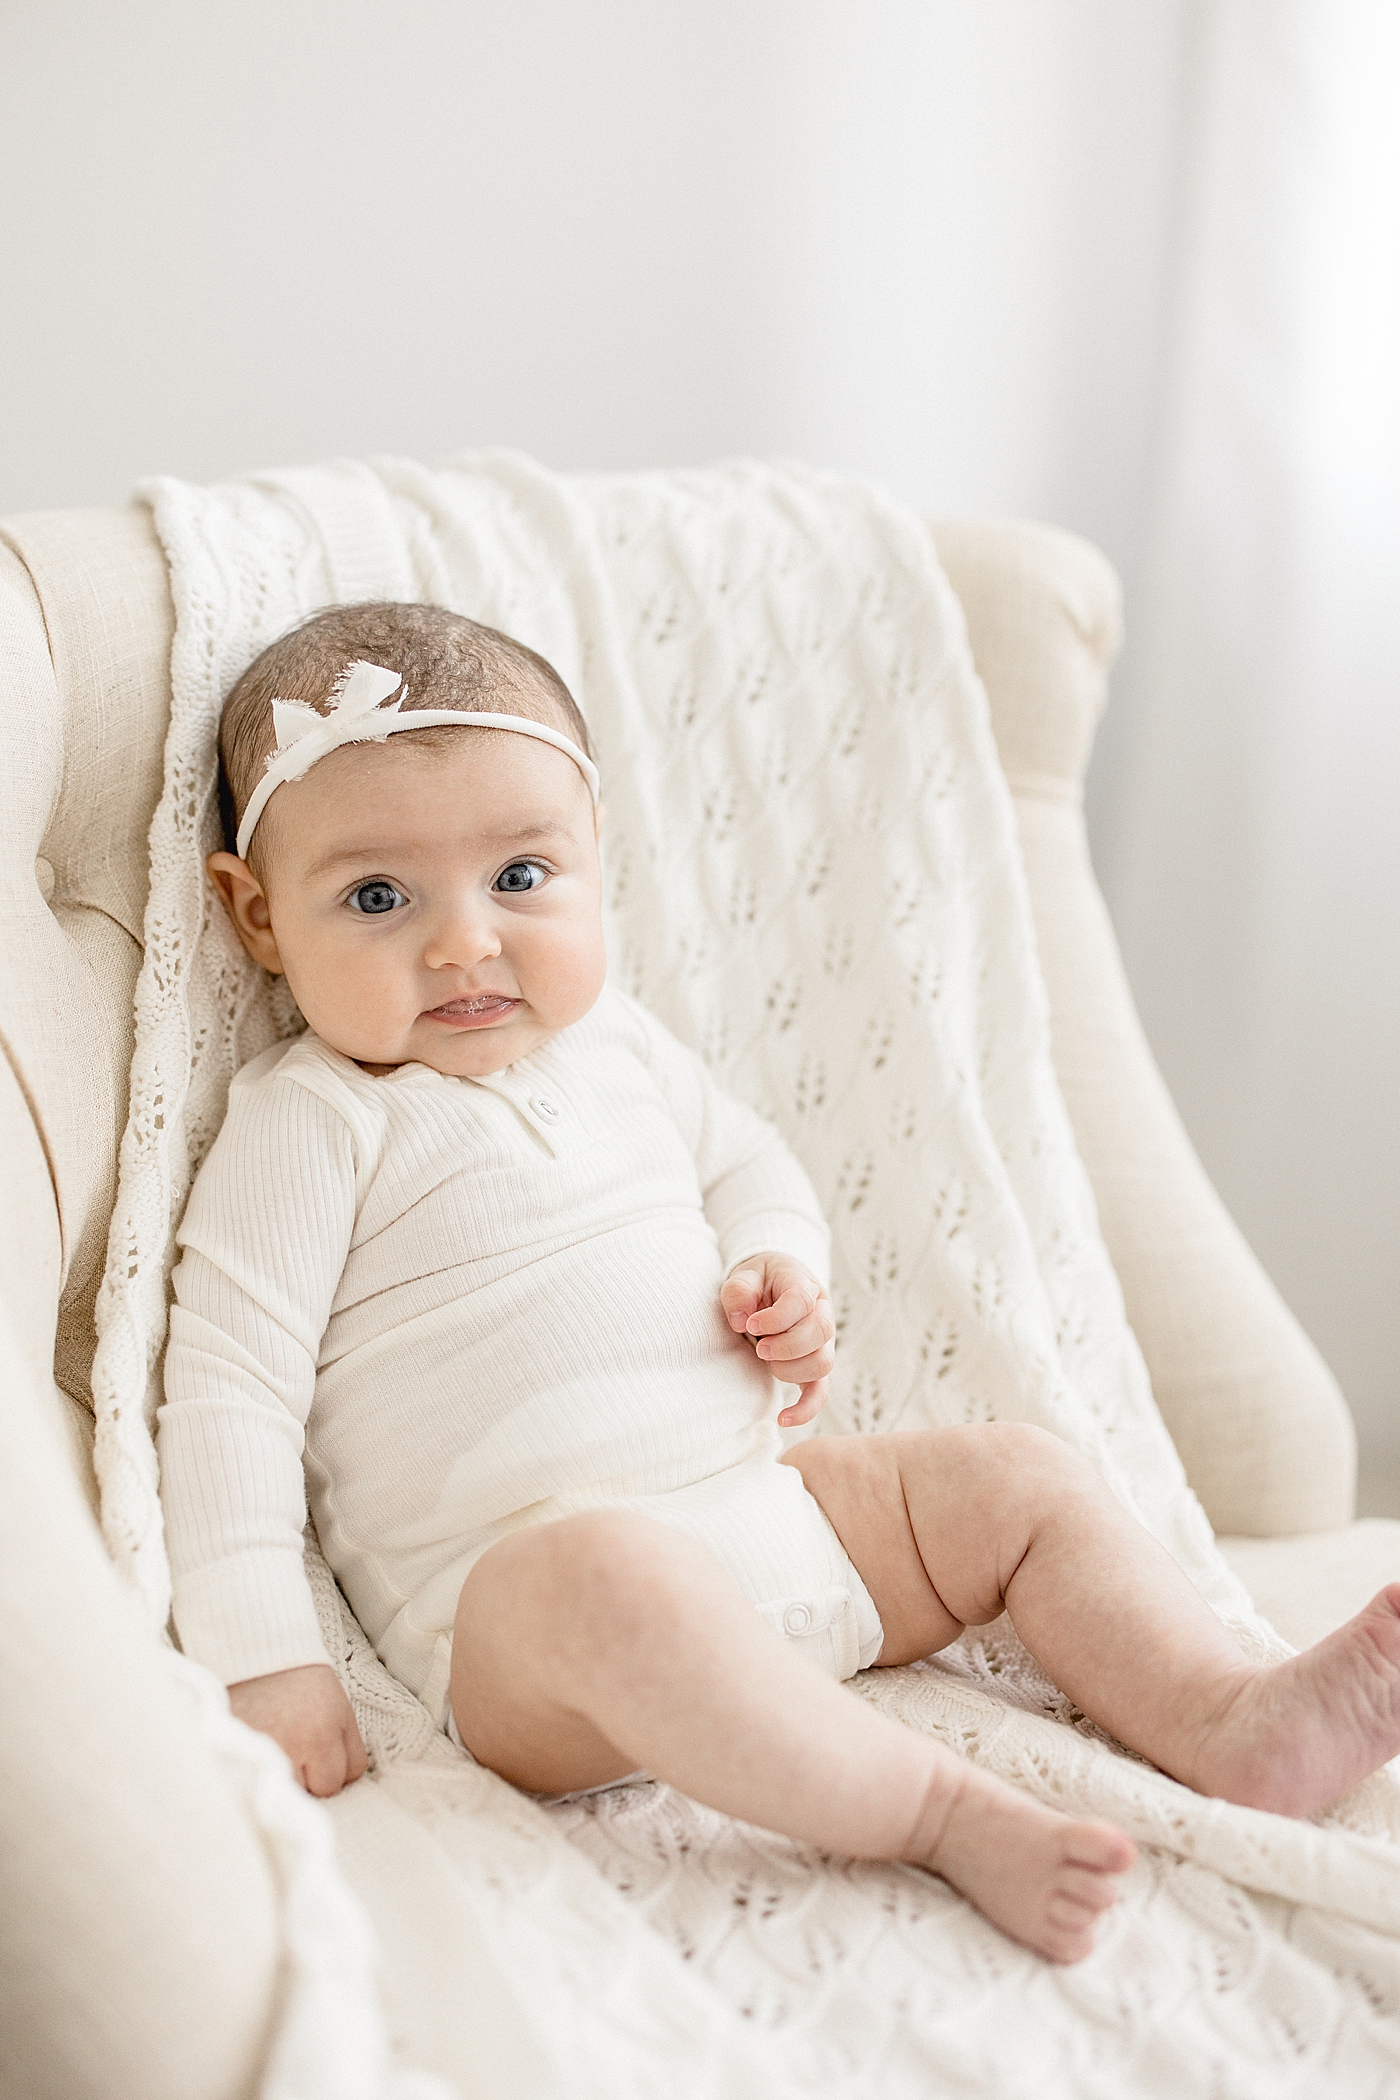 Baby girl sitting up in chair during milestone session. Photo by Brittany Elise Photography.